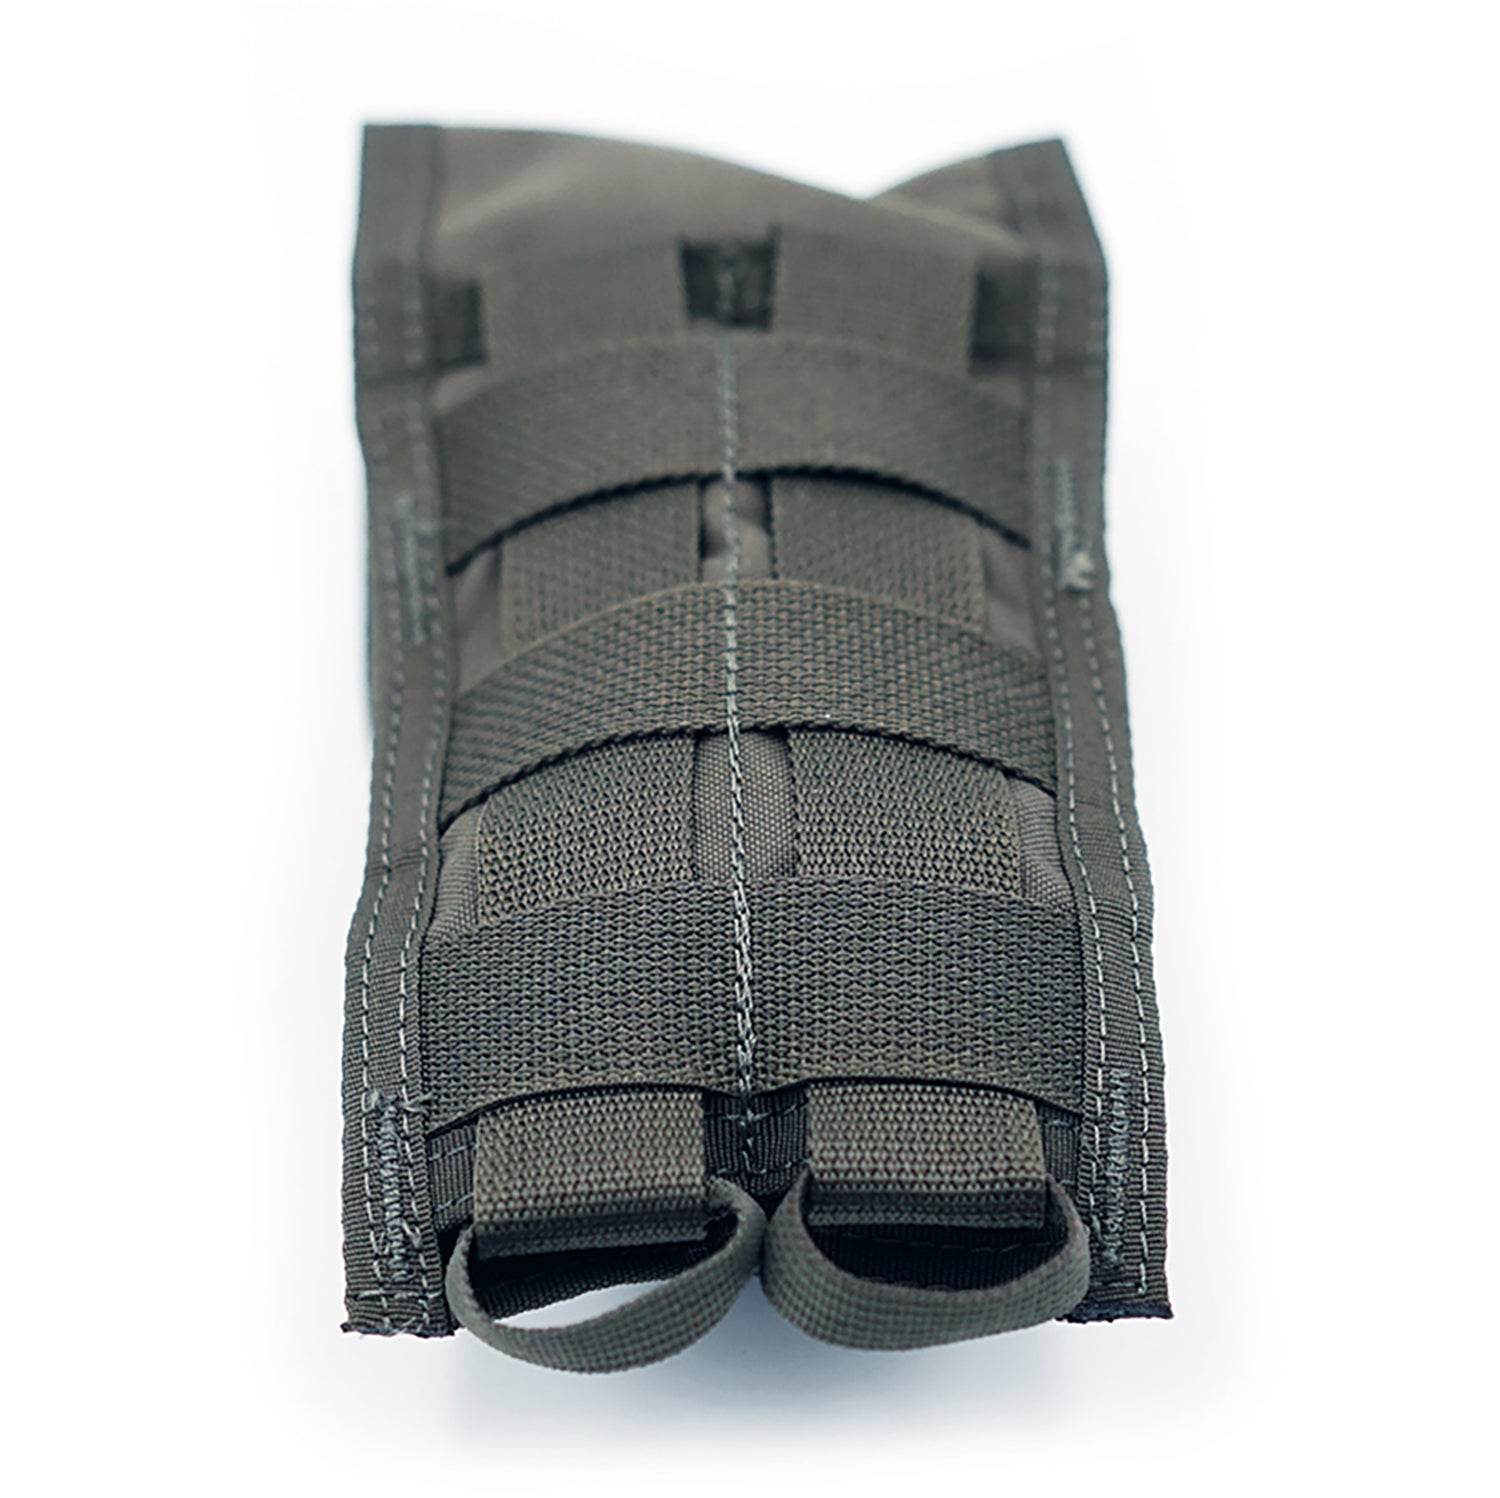 Pre MSA Paraclete Style Tiered M4 Mag Pouch